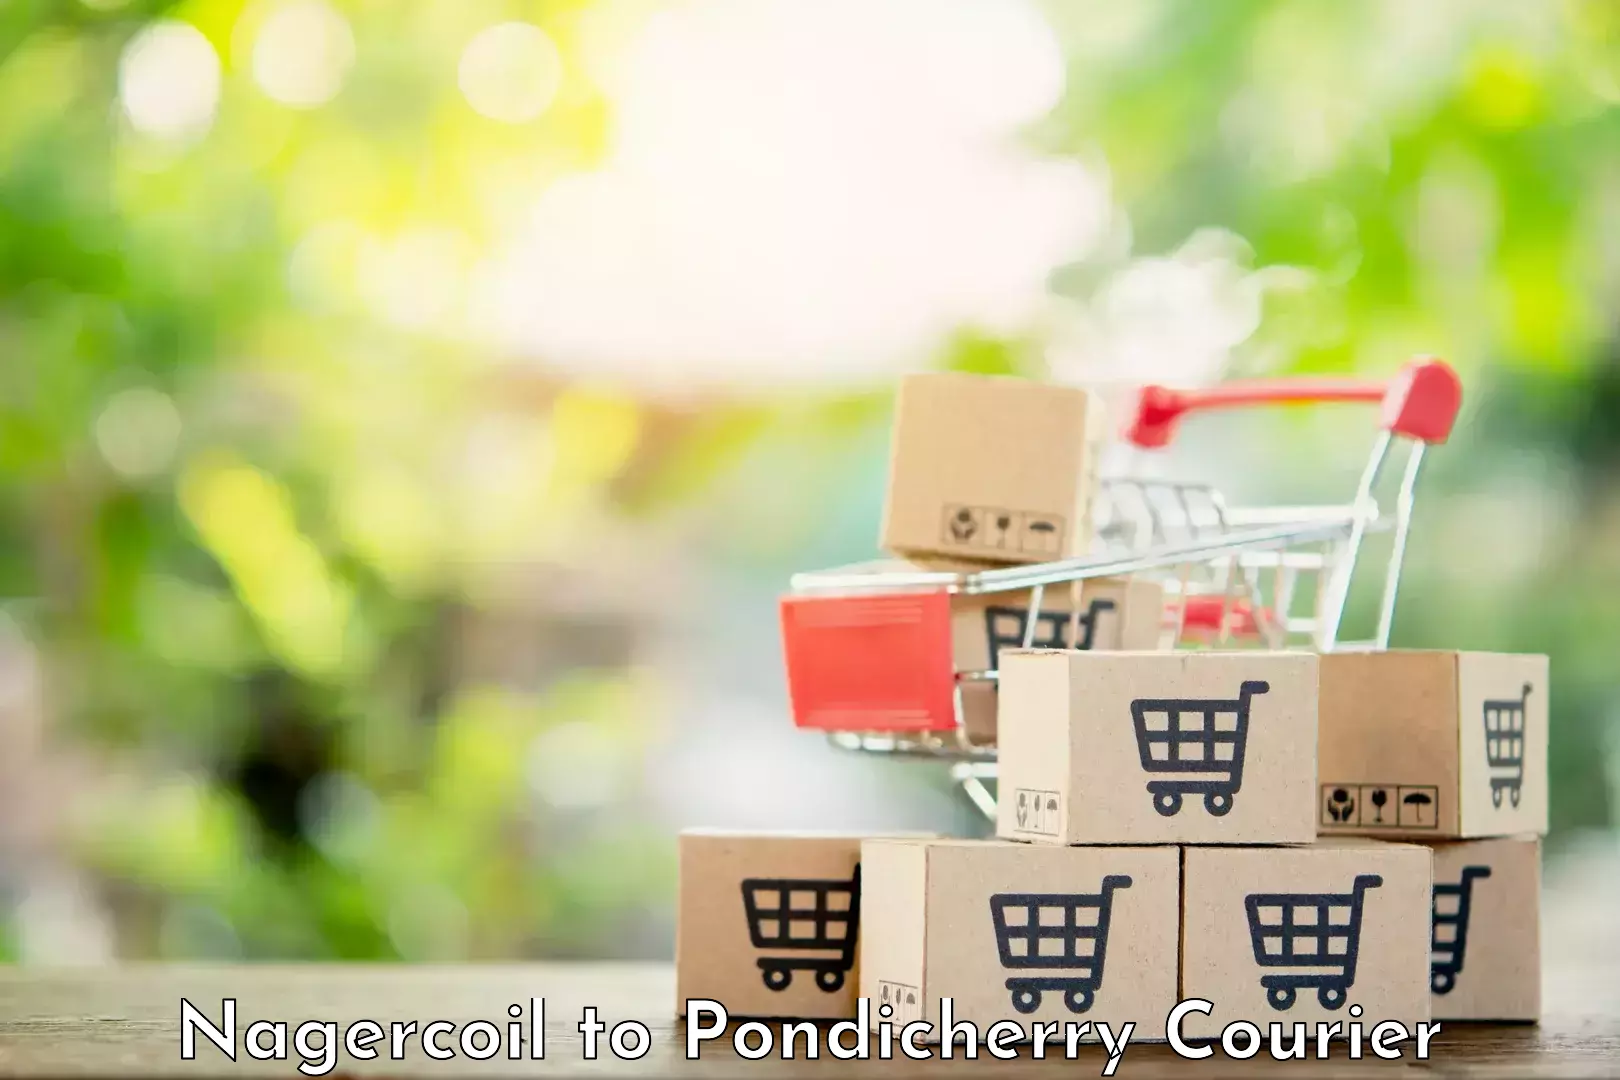 Easy access courier services Nagercoil to Pondicherry University